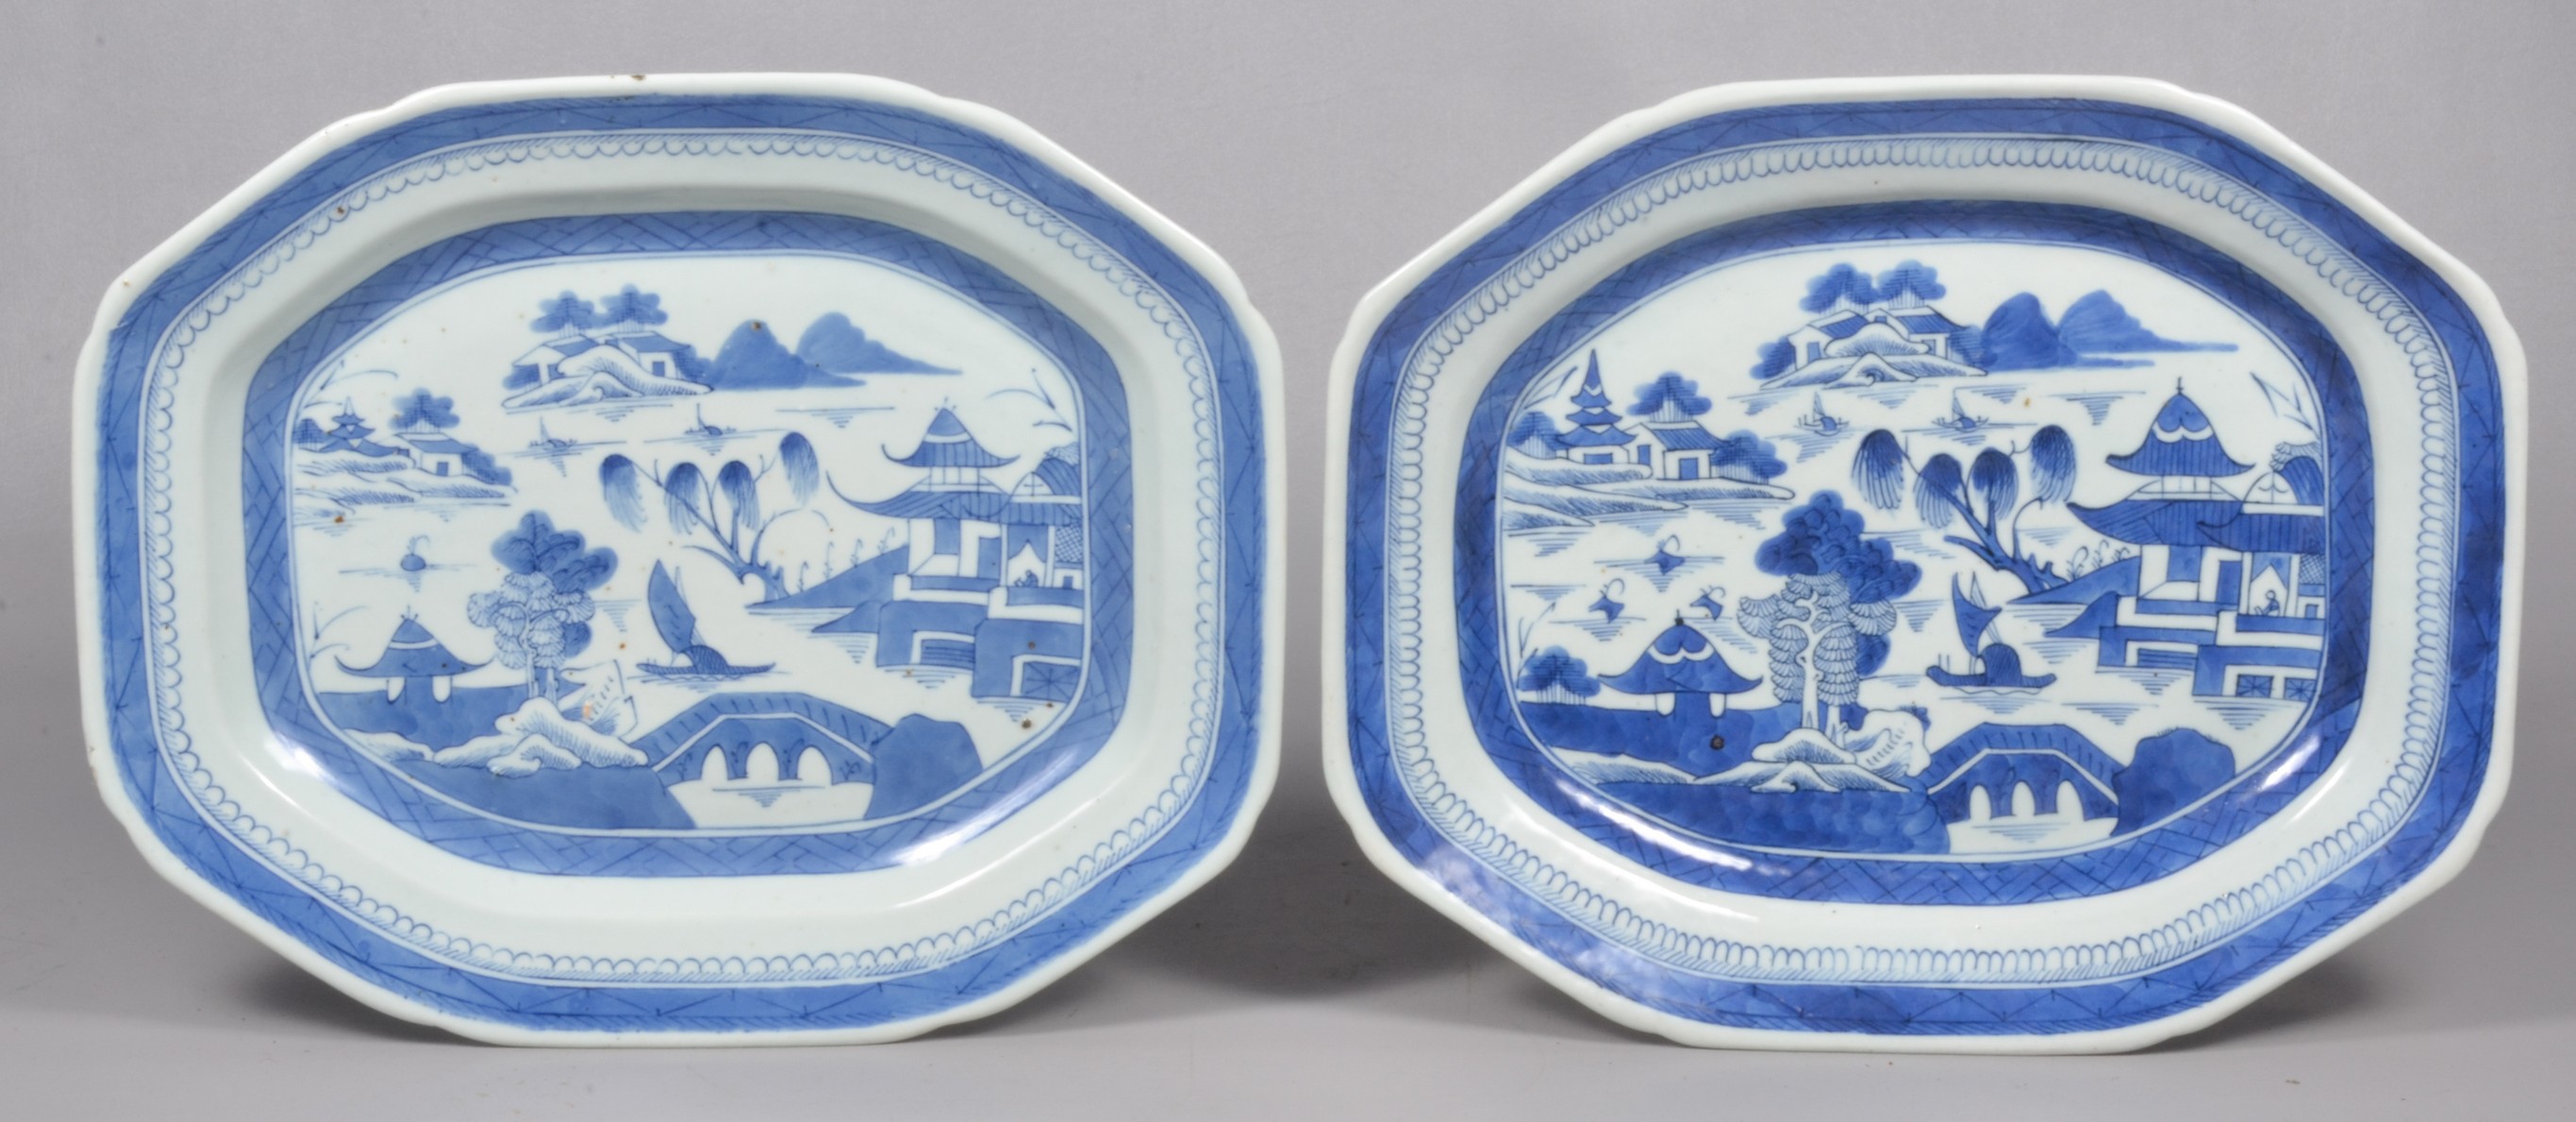  2 Chinese porcelain Canton platters  3b666a